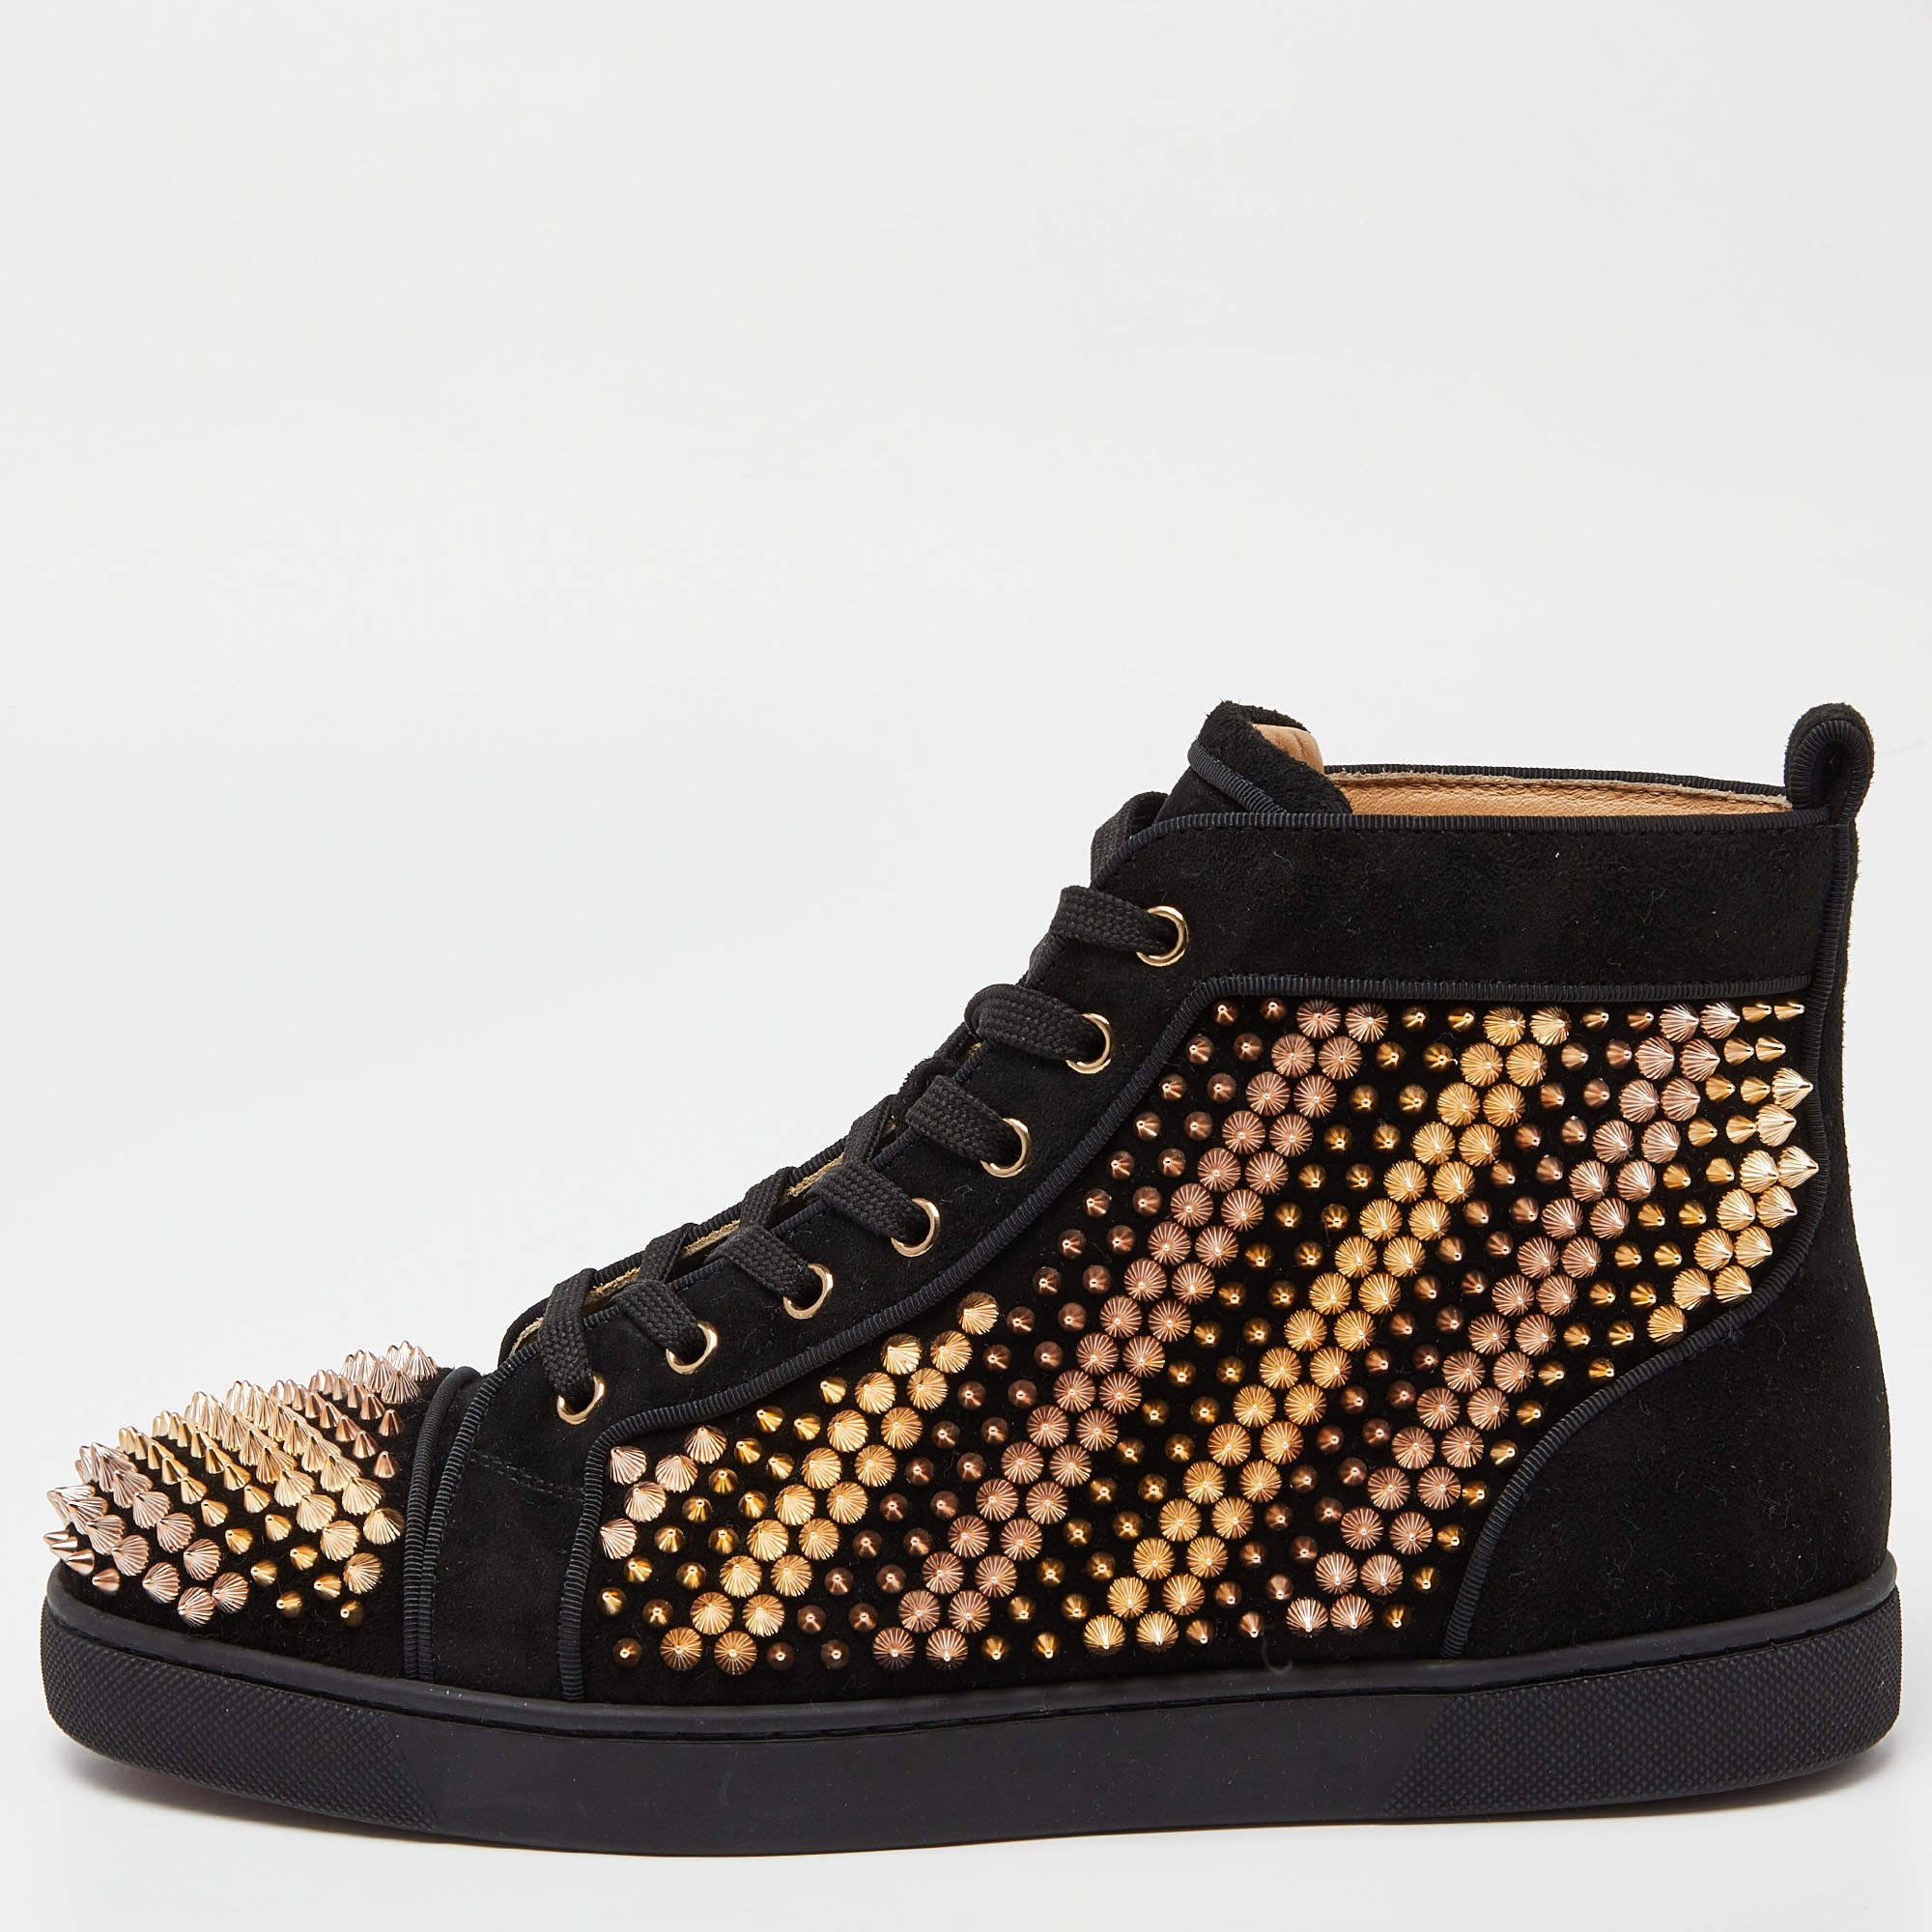 Christian Louboutin, Shoes, Suede Mustard Color Christian Louboutin Spike  Sneakers Louis